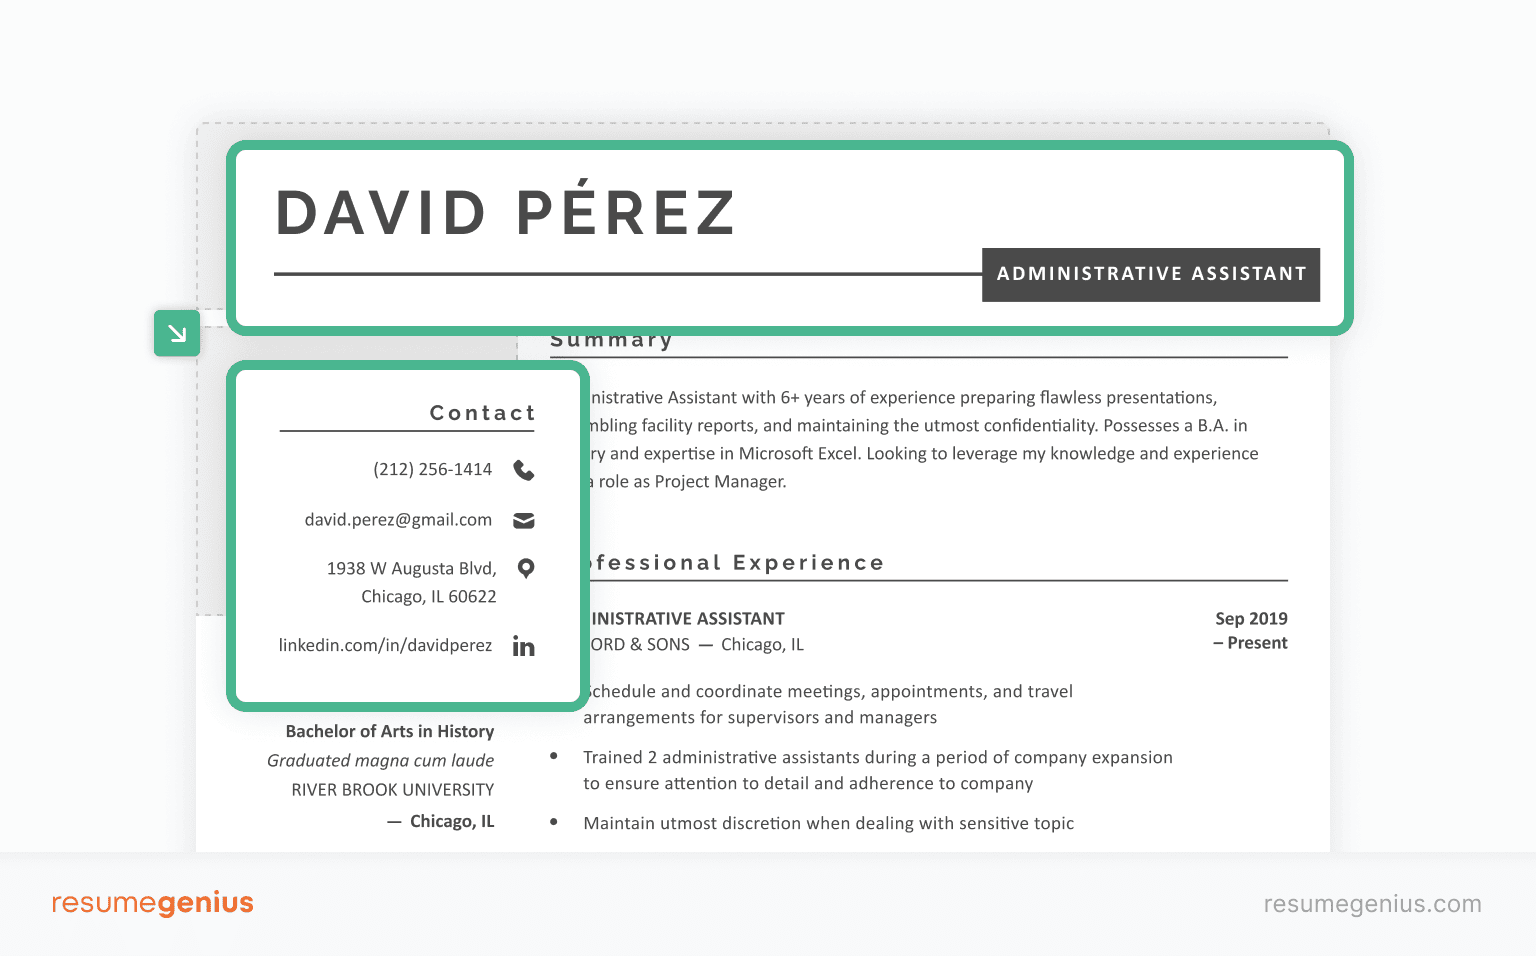 An example of how to write a resume header